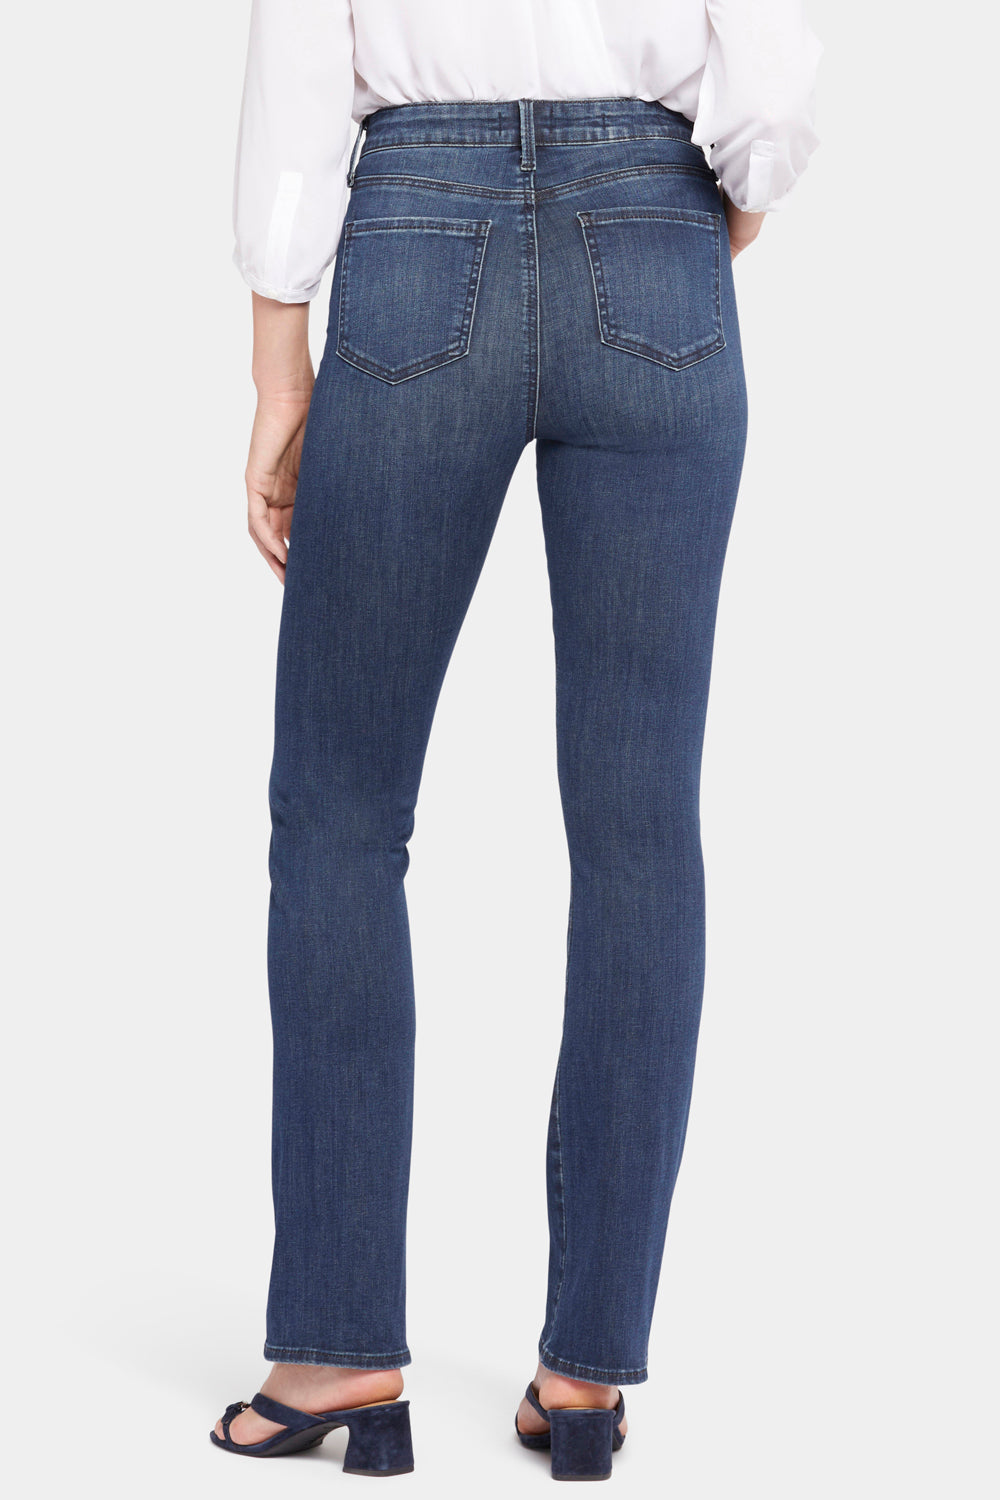 Le Silhouette Slim Bootcut Jeans With High Rise - Precious Blue | NYDJ